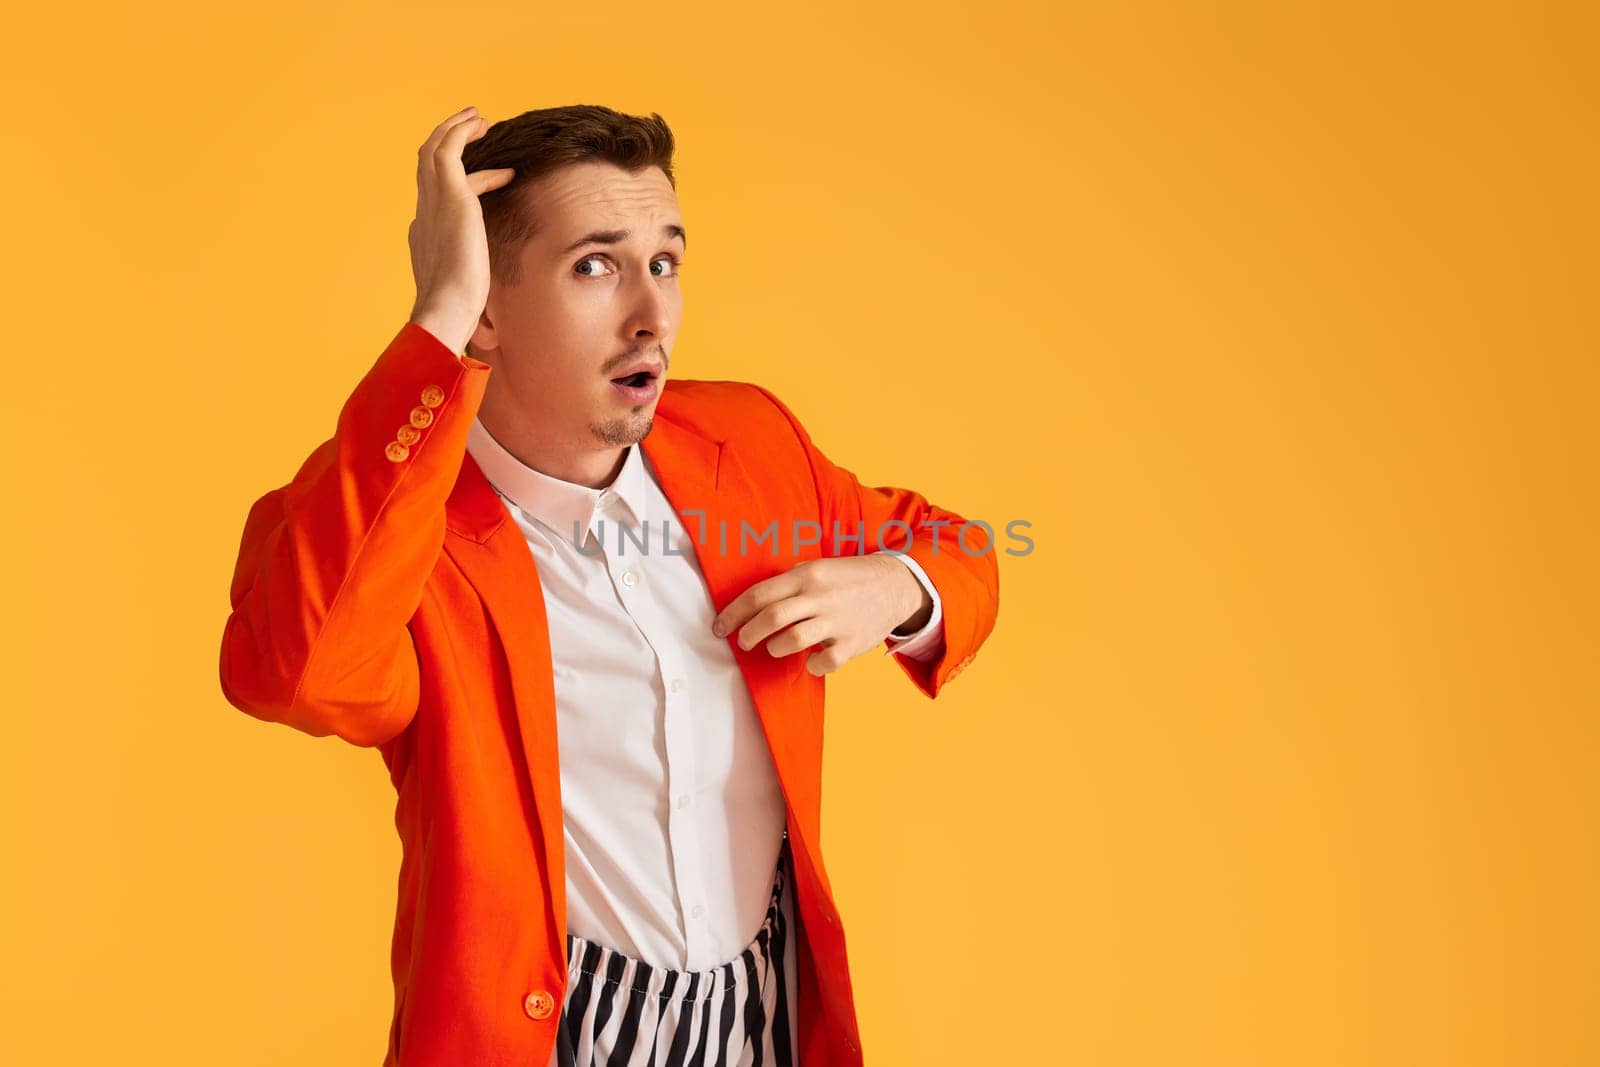 Cheerful funny young man in orange jacket and striped pants on yellow background.